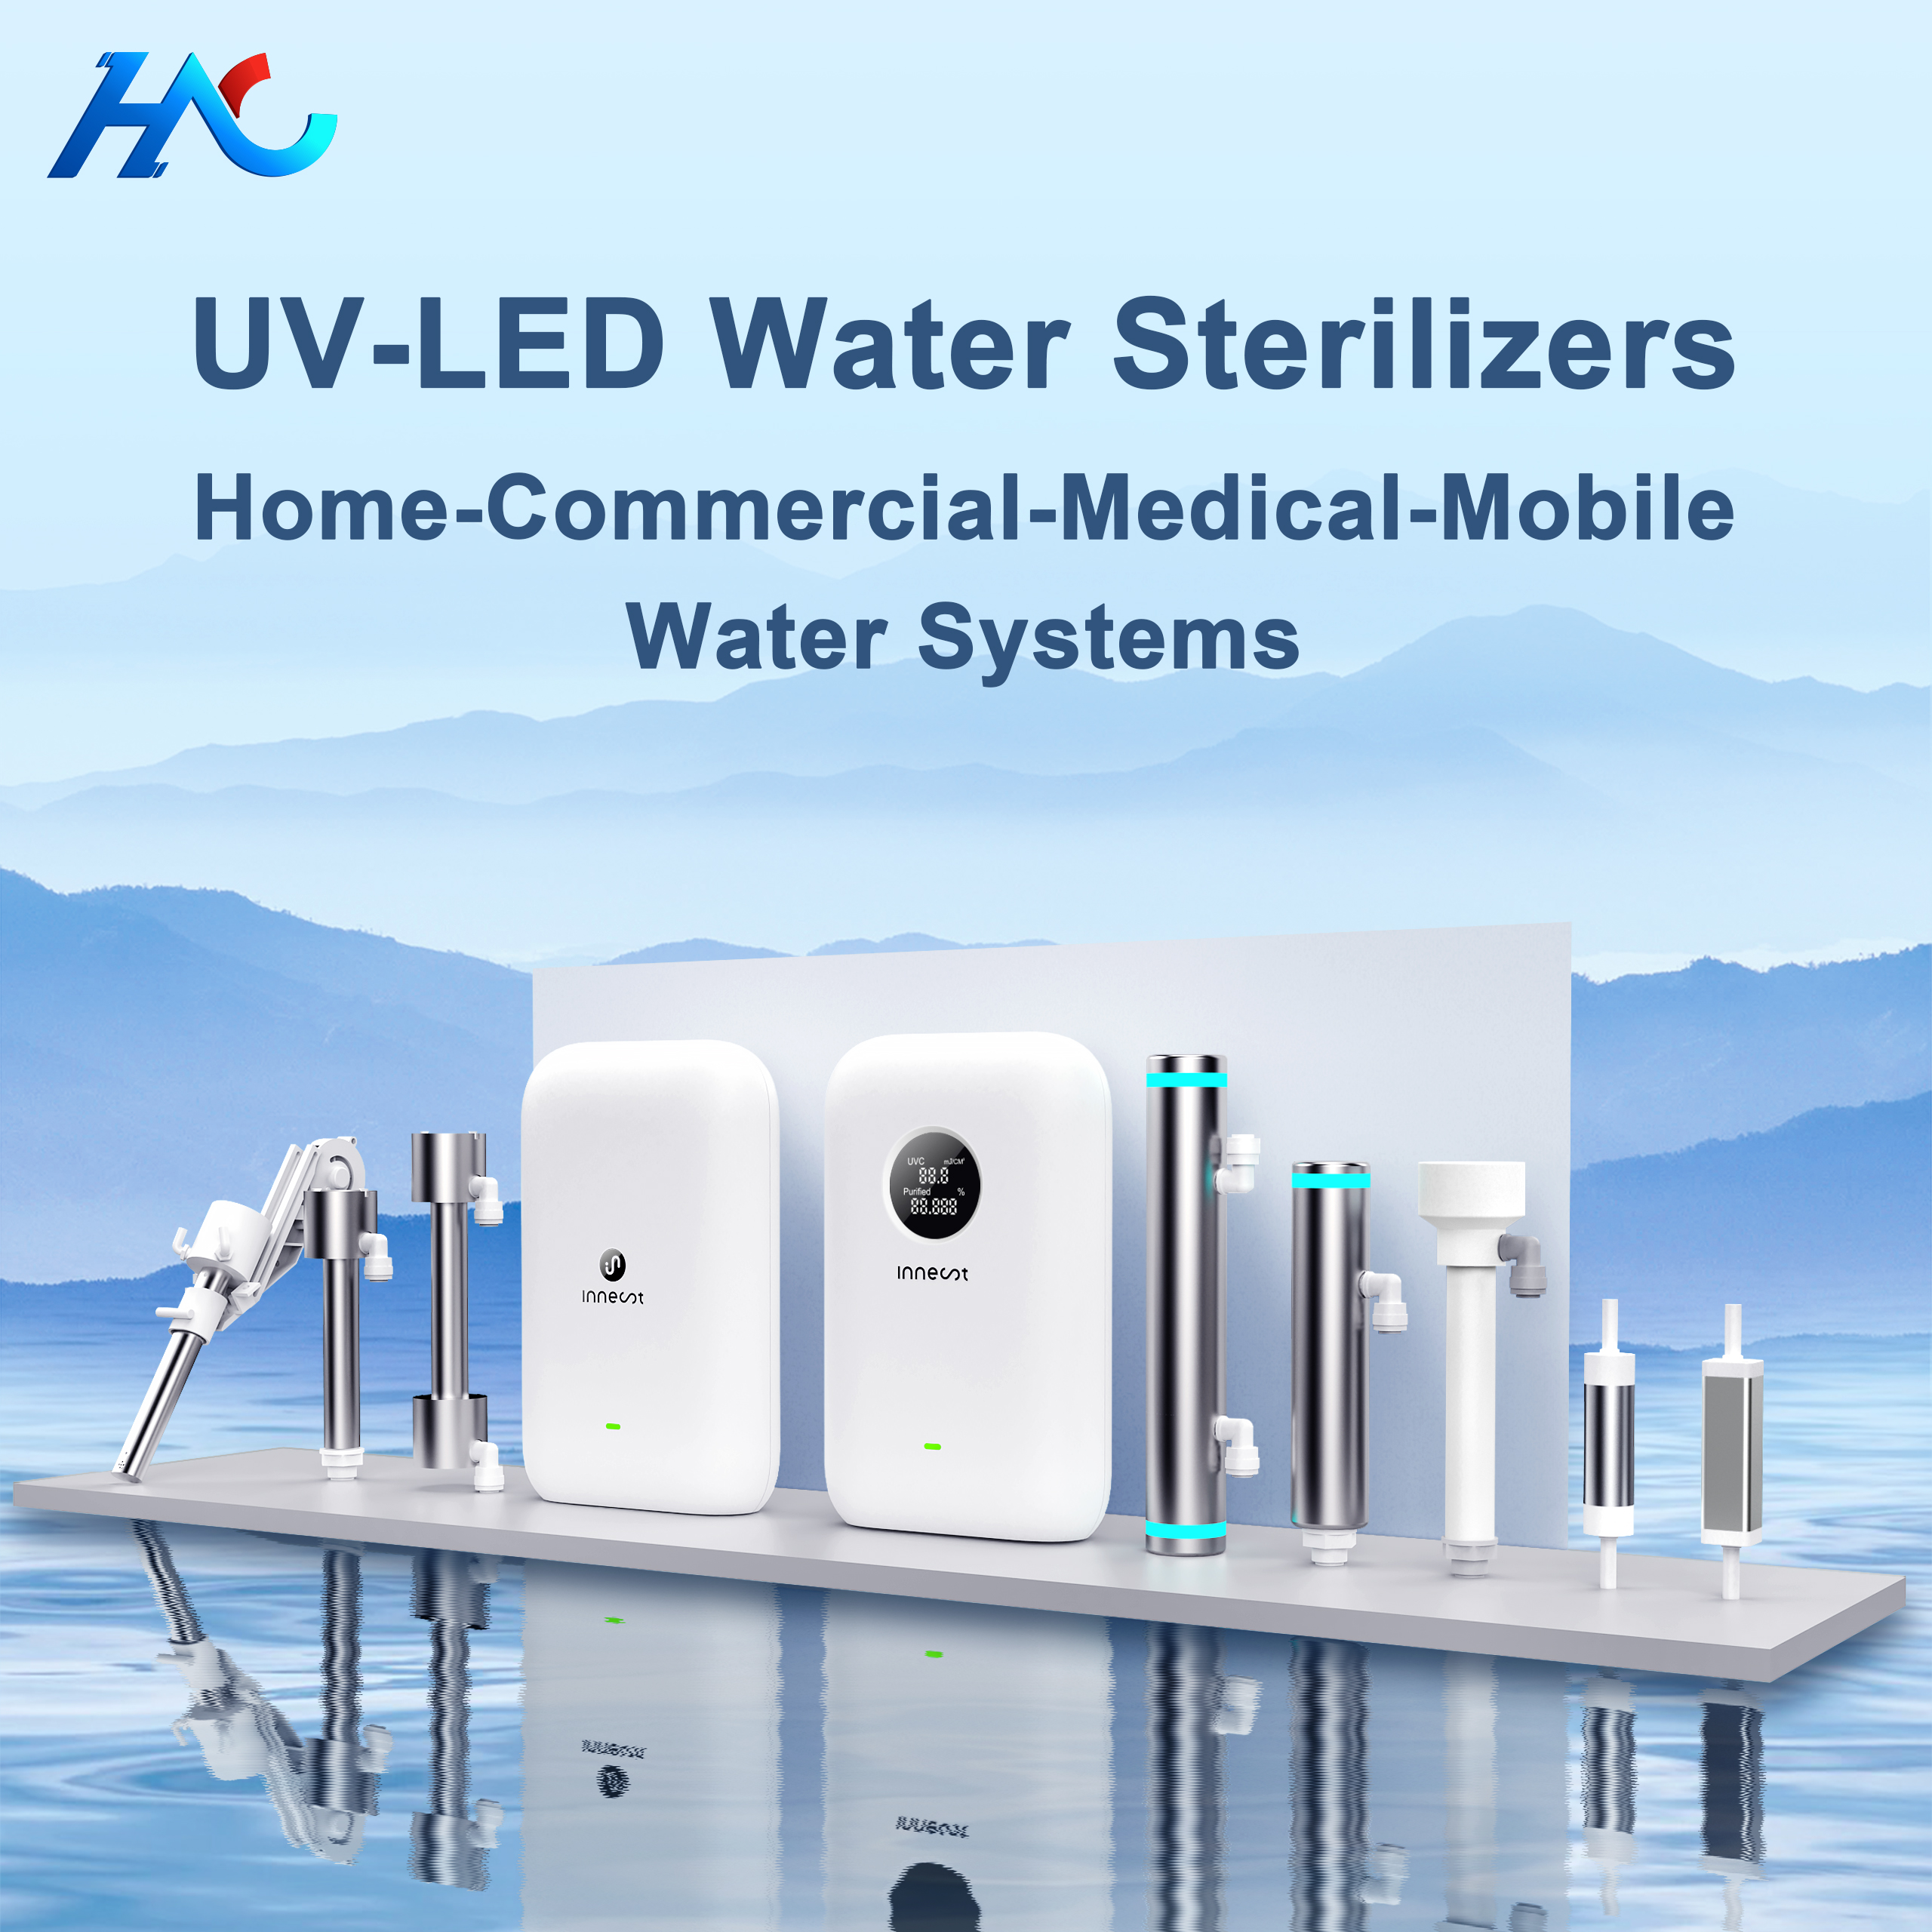 UV-LED Water Sterilziers for: Home: Faucet drinking water, Kichten & BathroomCommerical: Office, Medical, Flat, Hotel, School etc.Outdoor: RV & ...